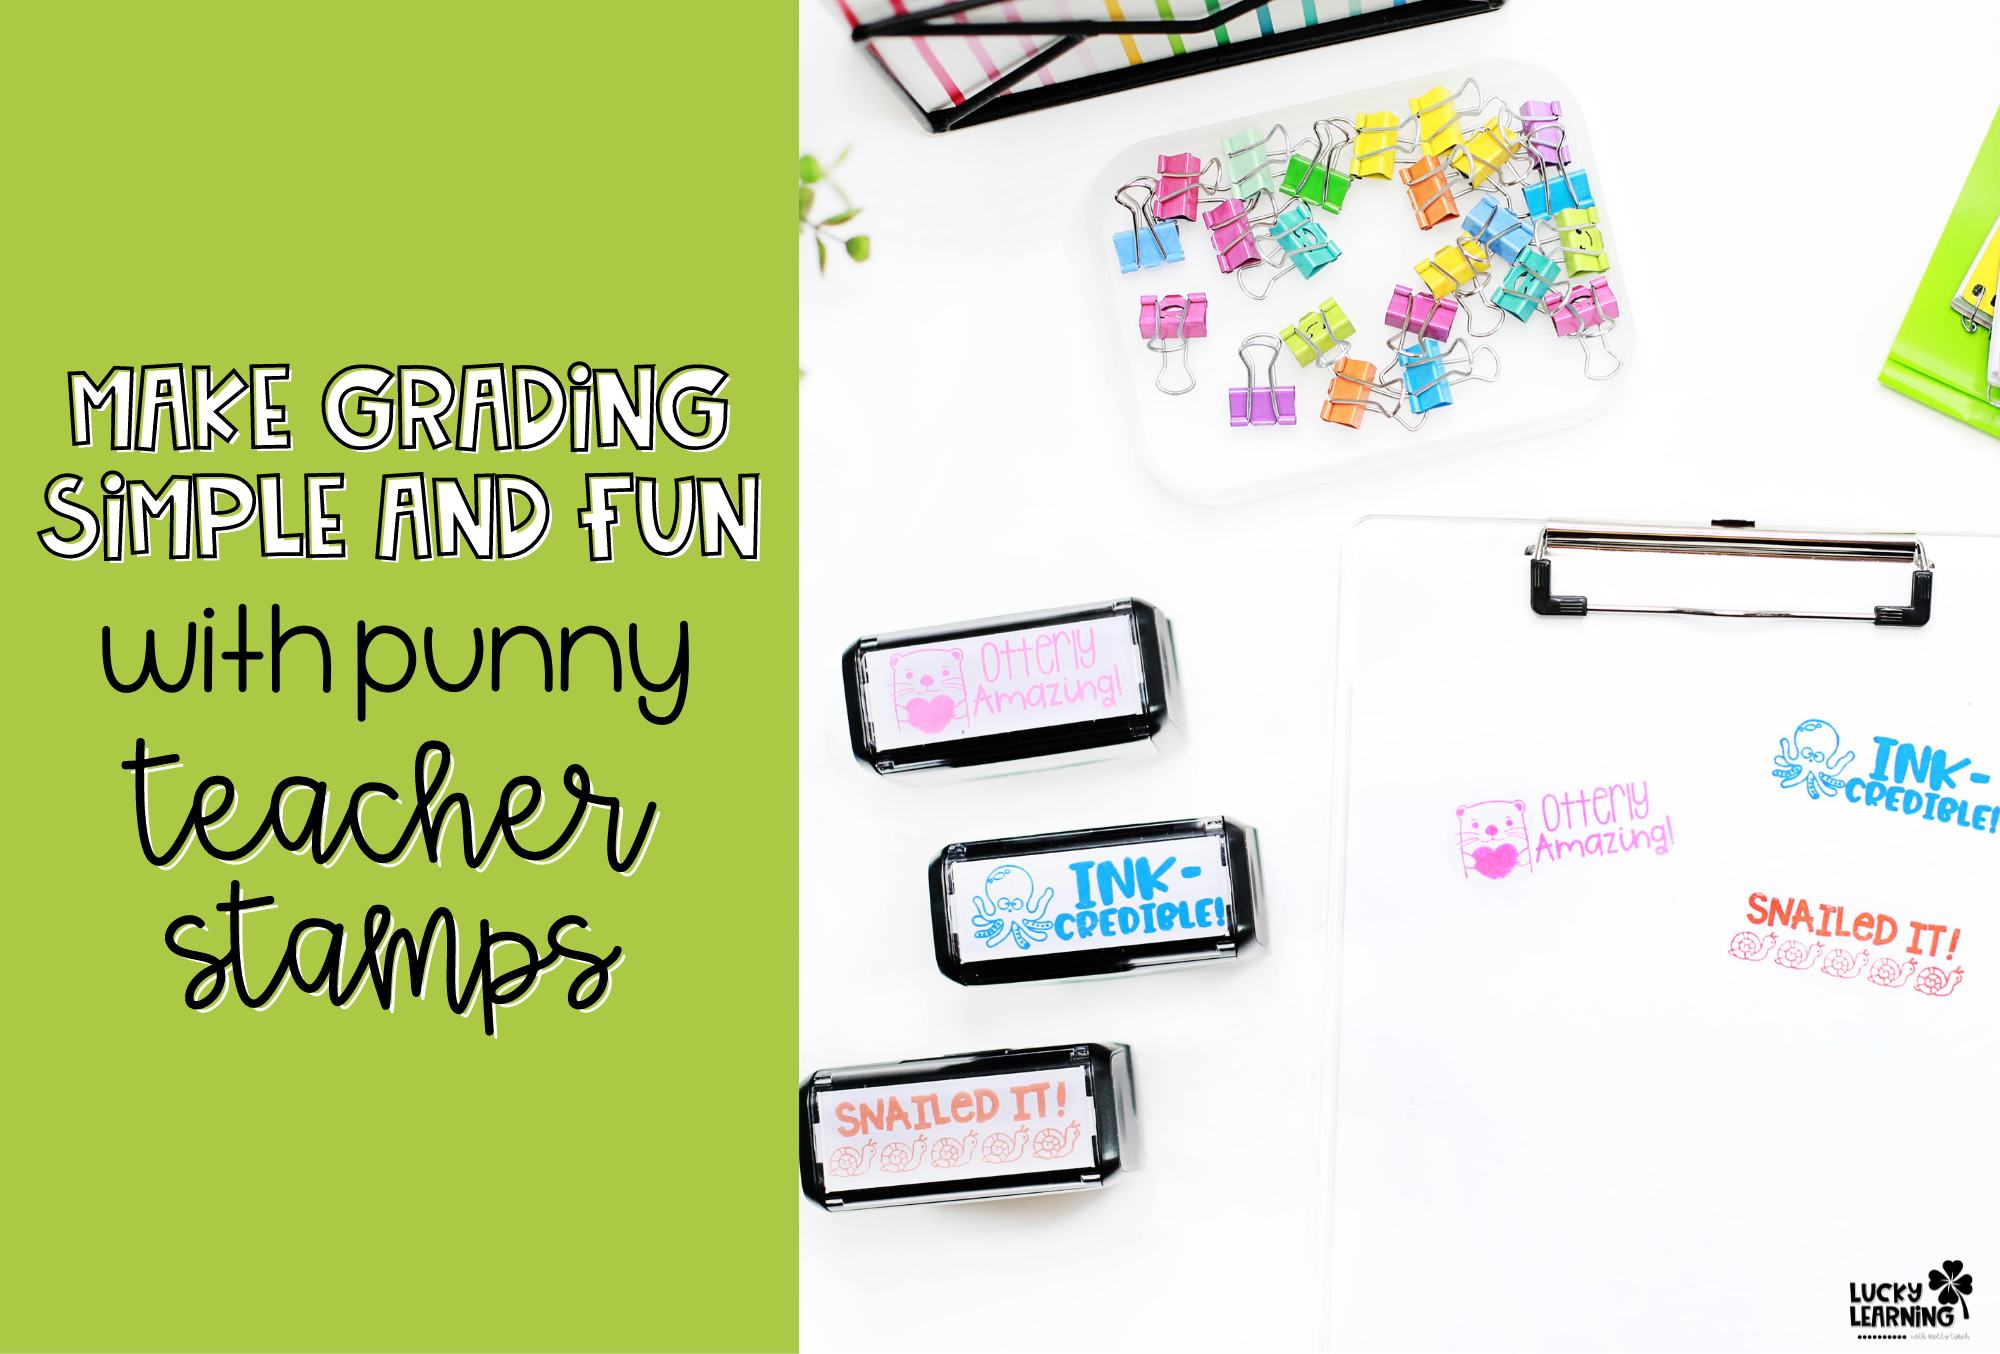 custom stamps including a cactus option | Lucky Learning with Molly Lynch